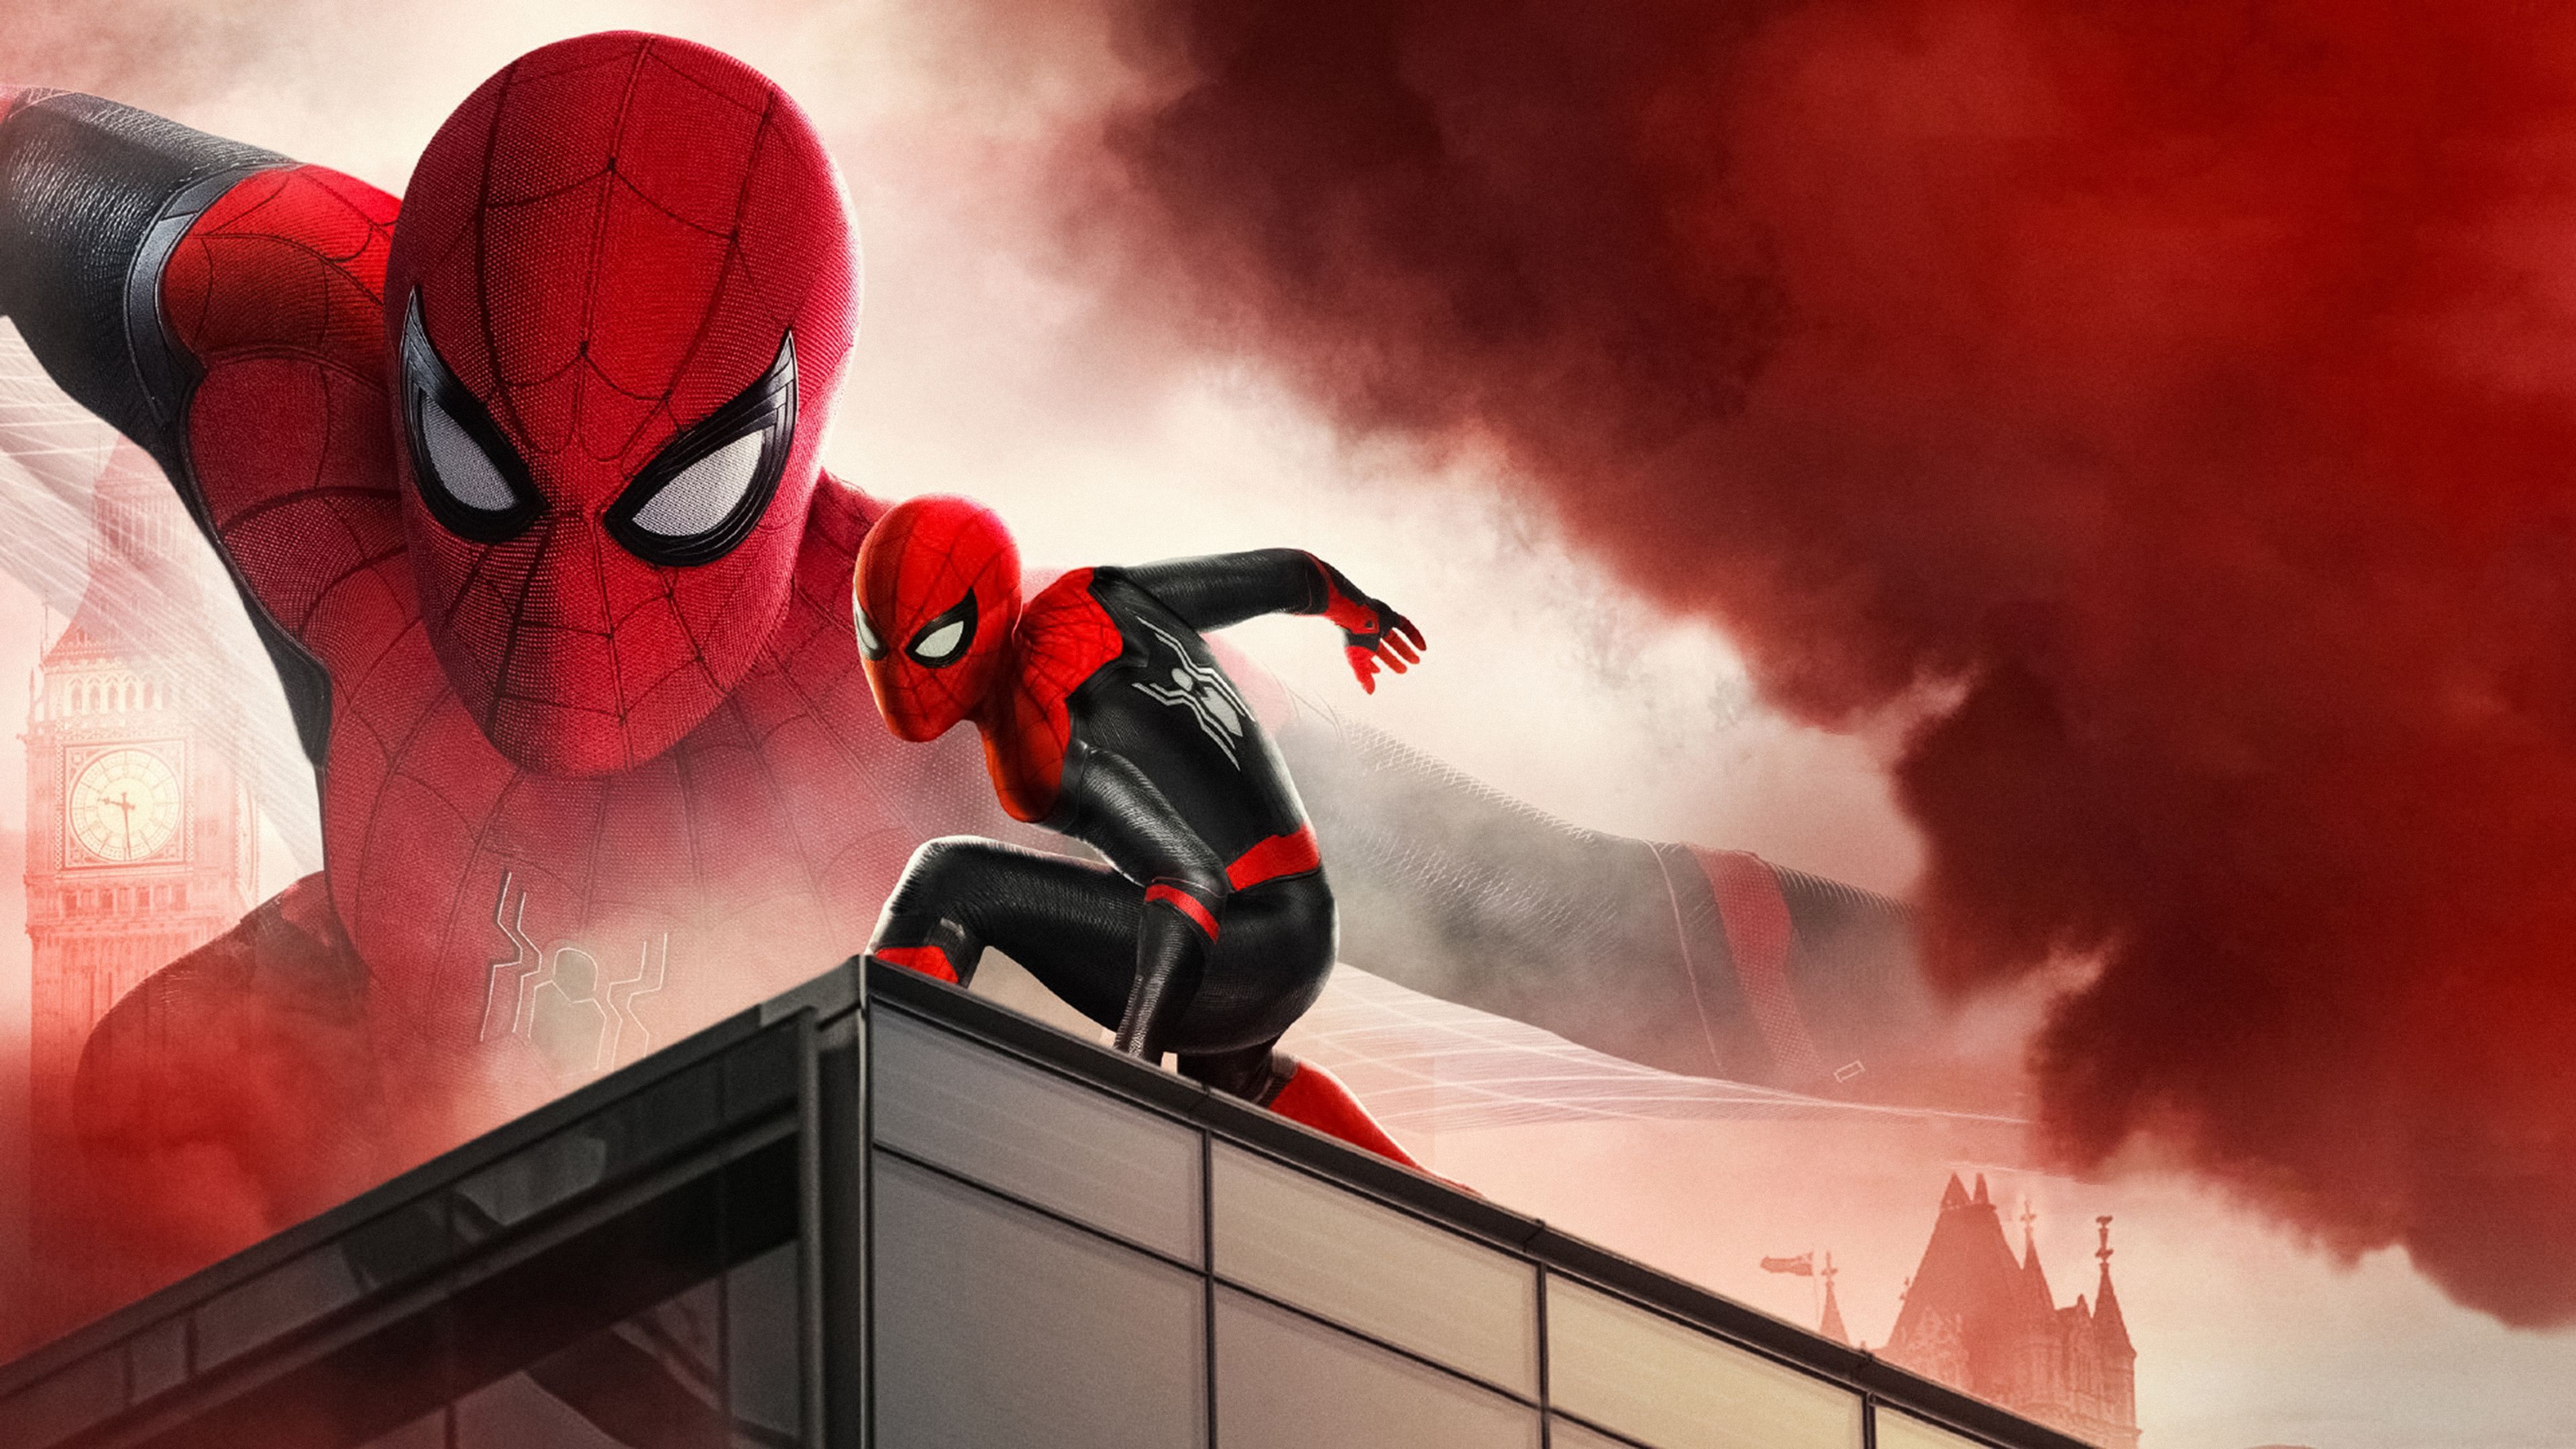 Spider Man Far Fromhome tom holland wallpaper, superheroes wallpaper, spiderman wallpaper, spiderman far from home wa. Spiderman, Superhero, Homecoming posters